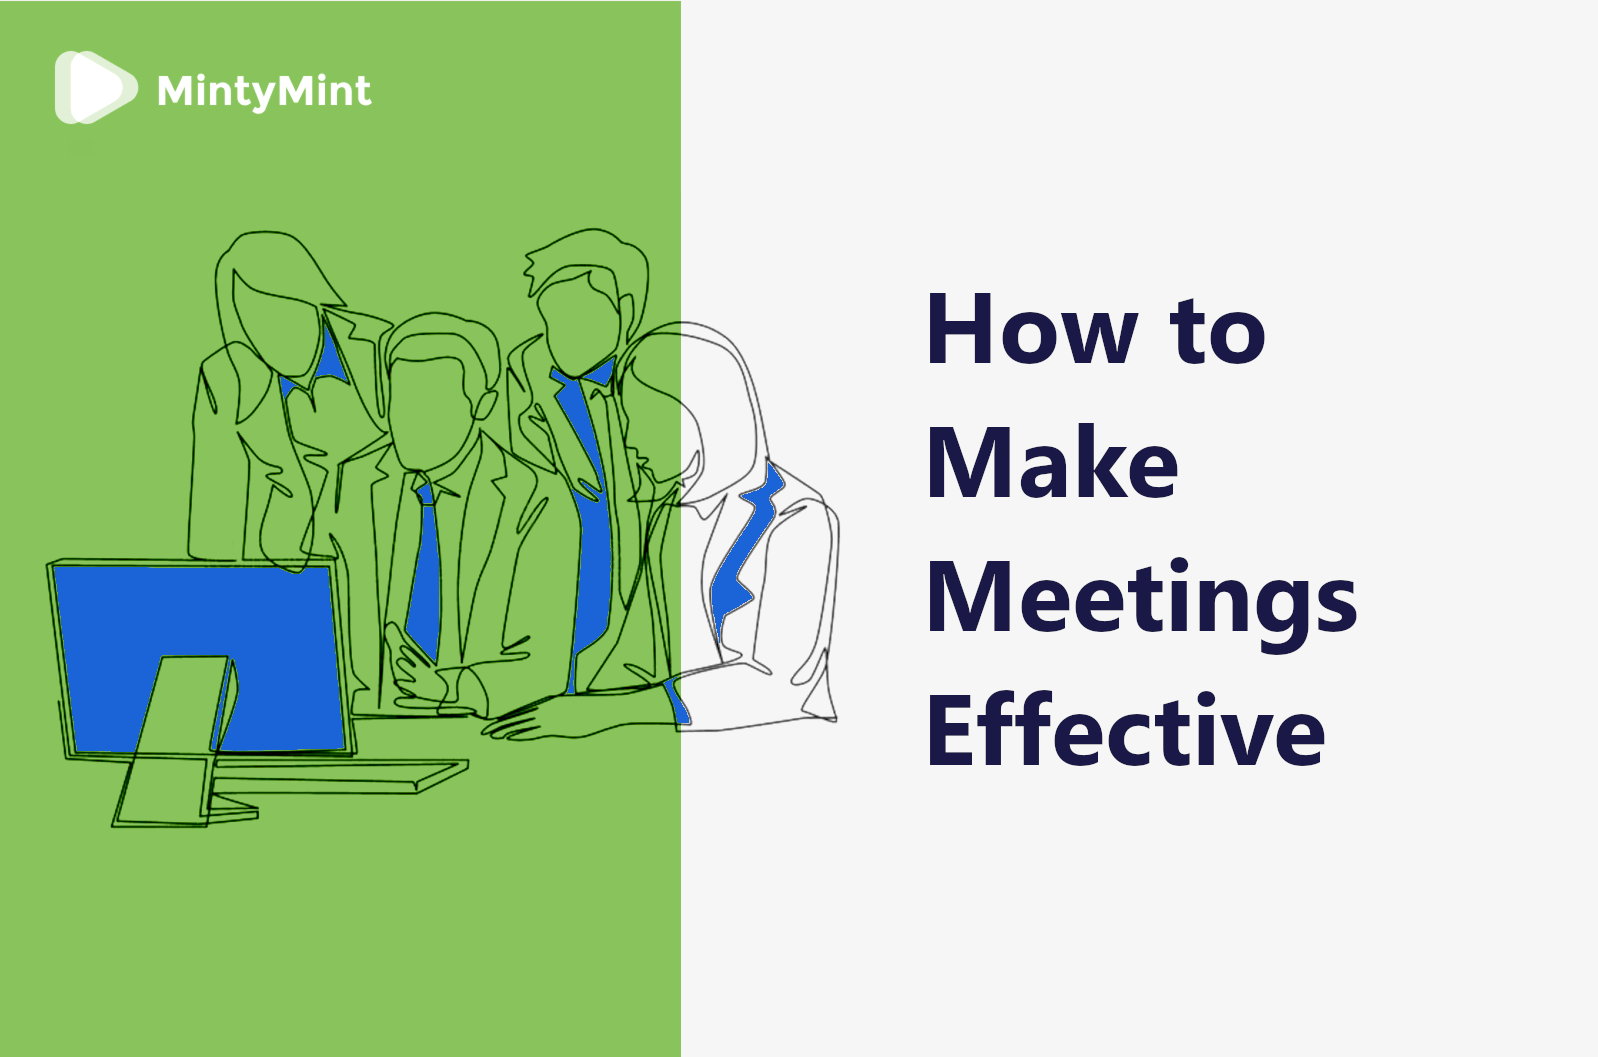 How to make meetings effective